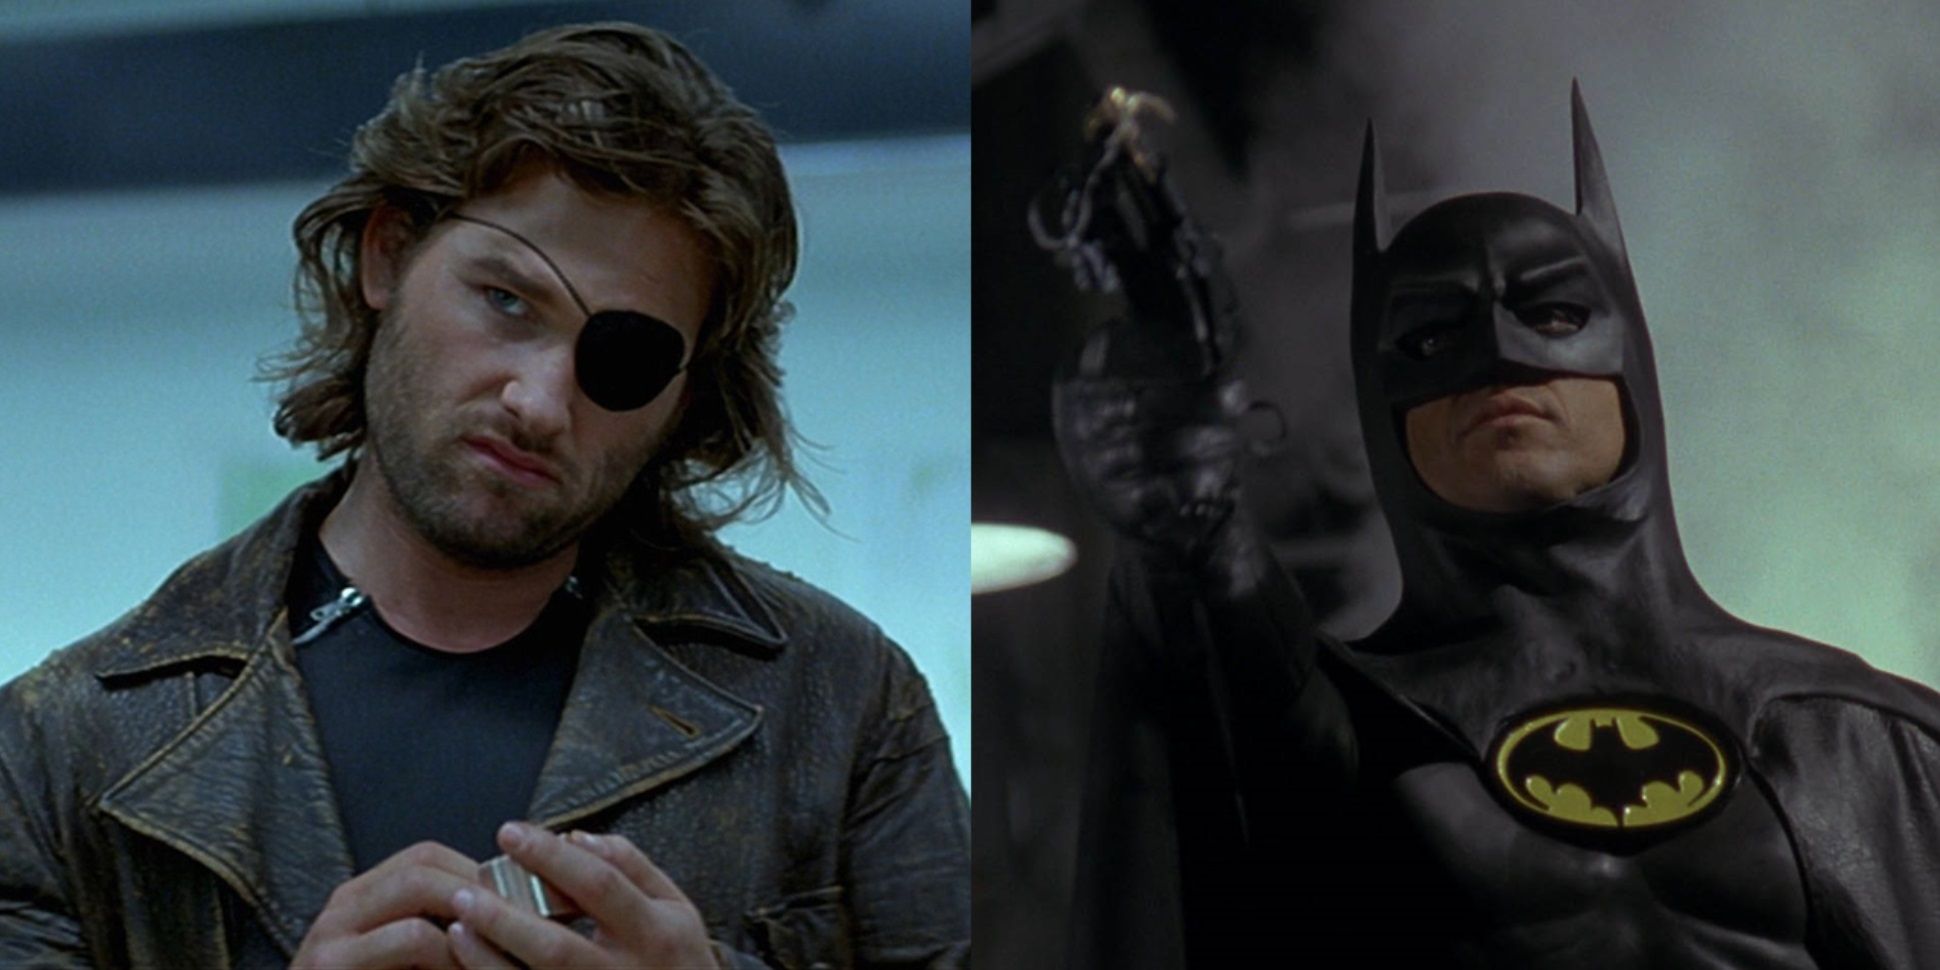 Split image of Kurt Russell in Escape from New York and Michael Keaton in Batman